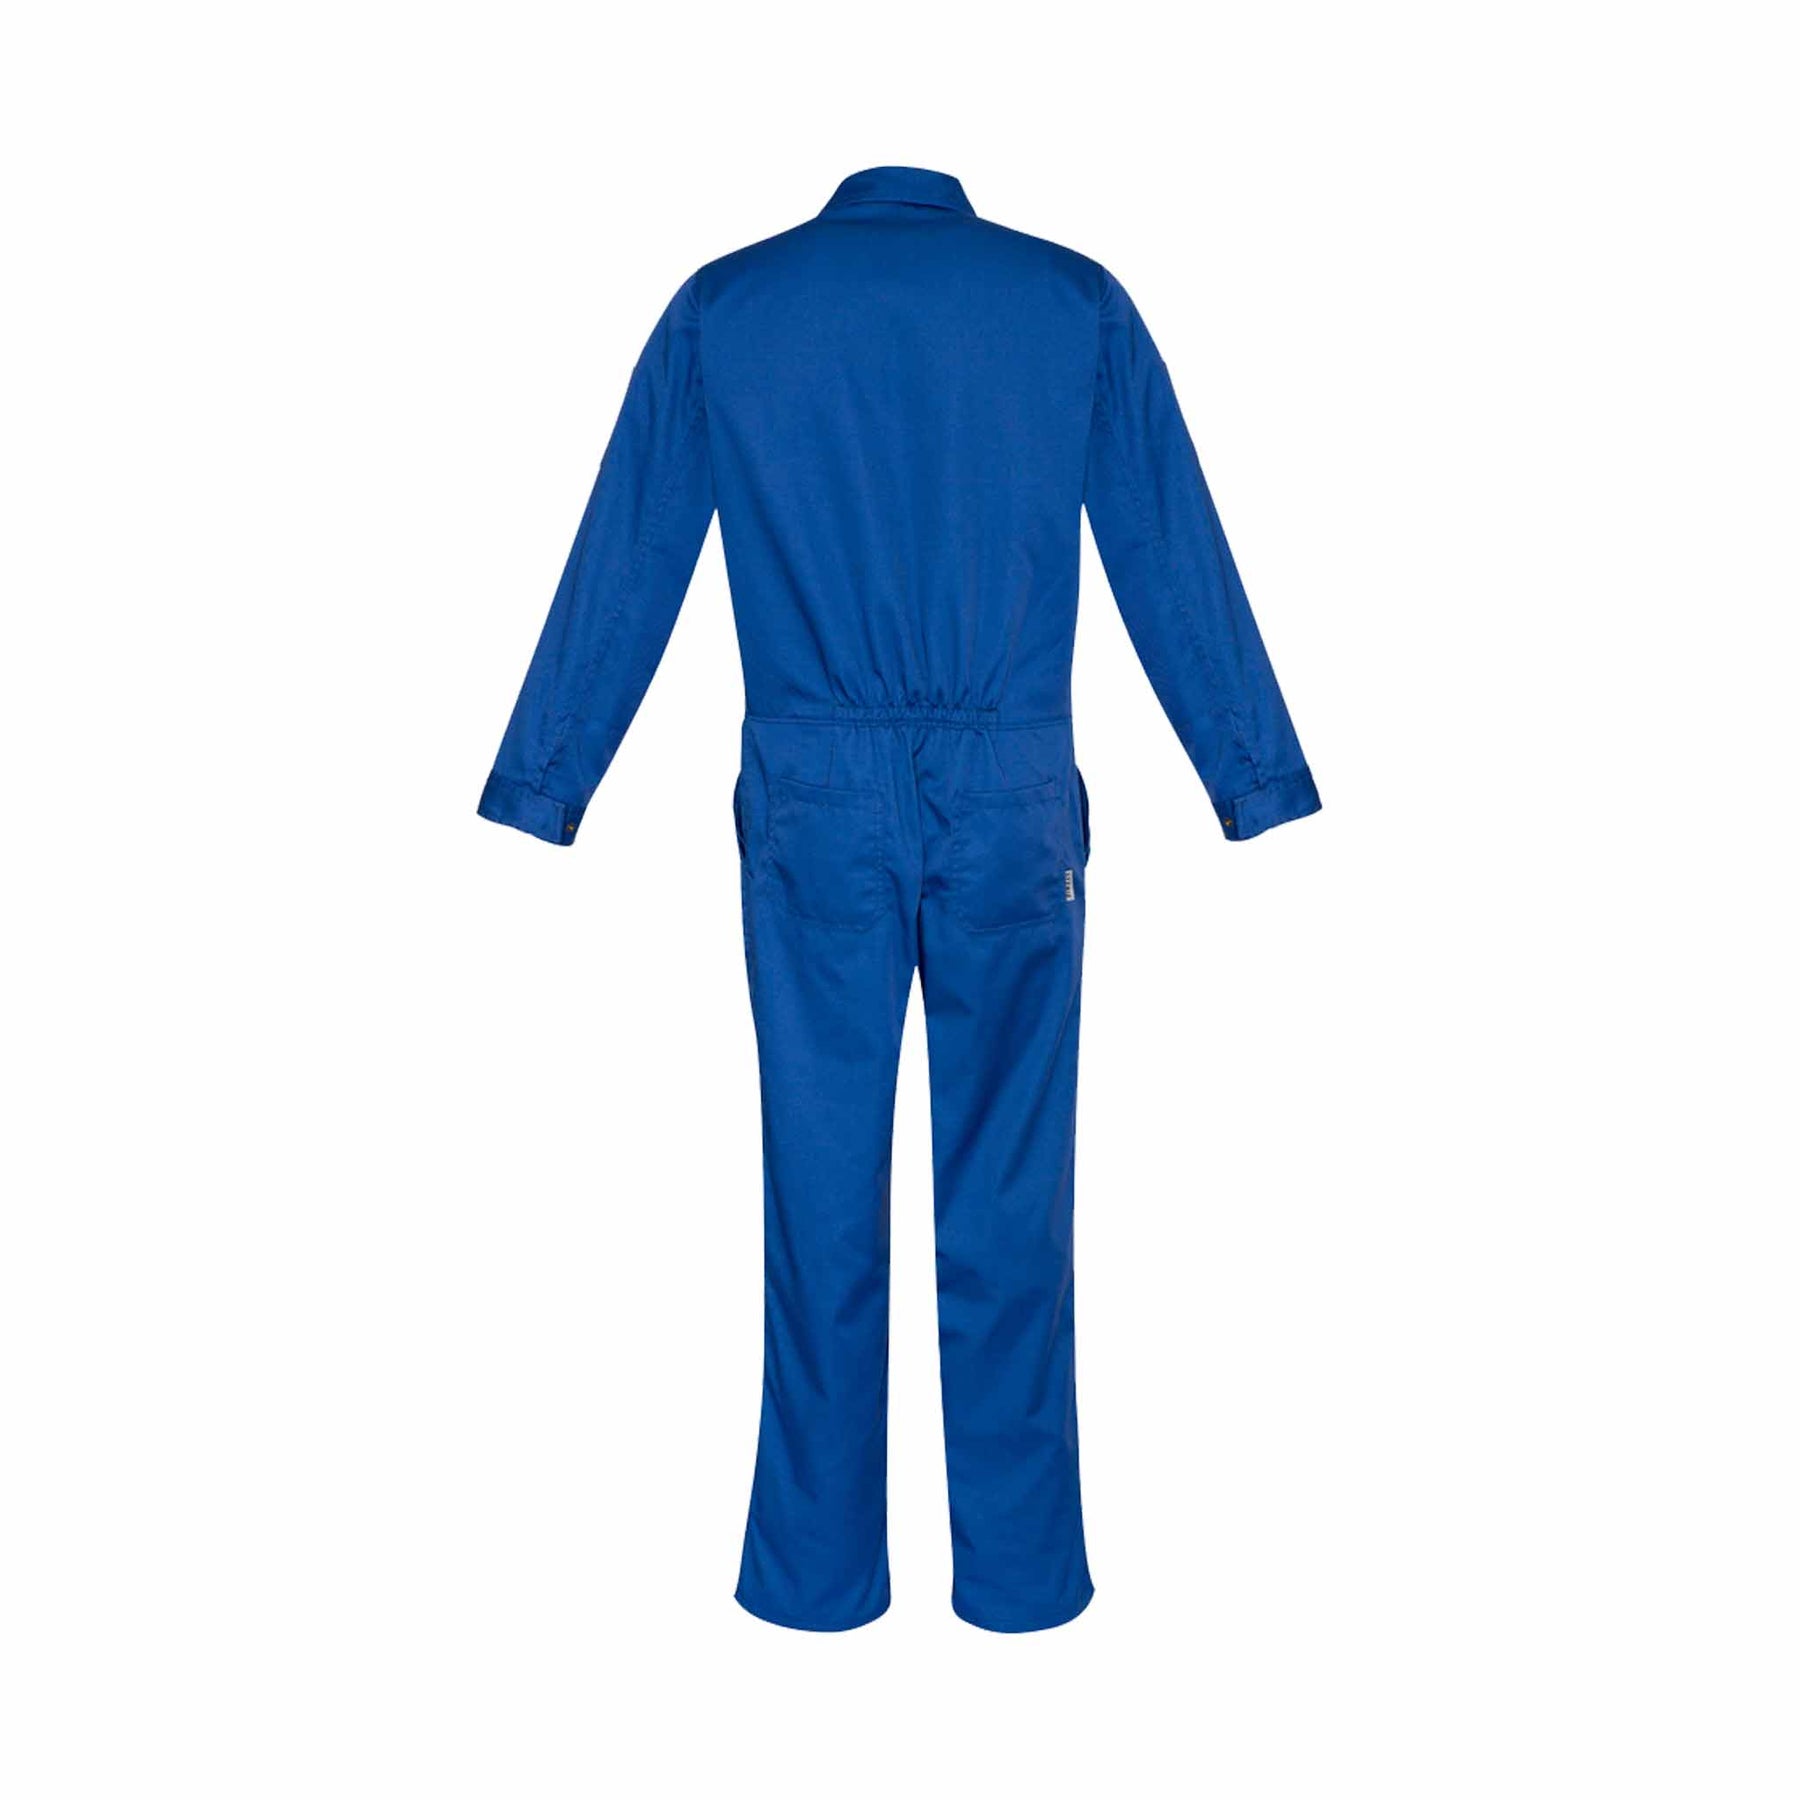 Long sleeve royal overalls back view